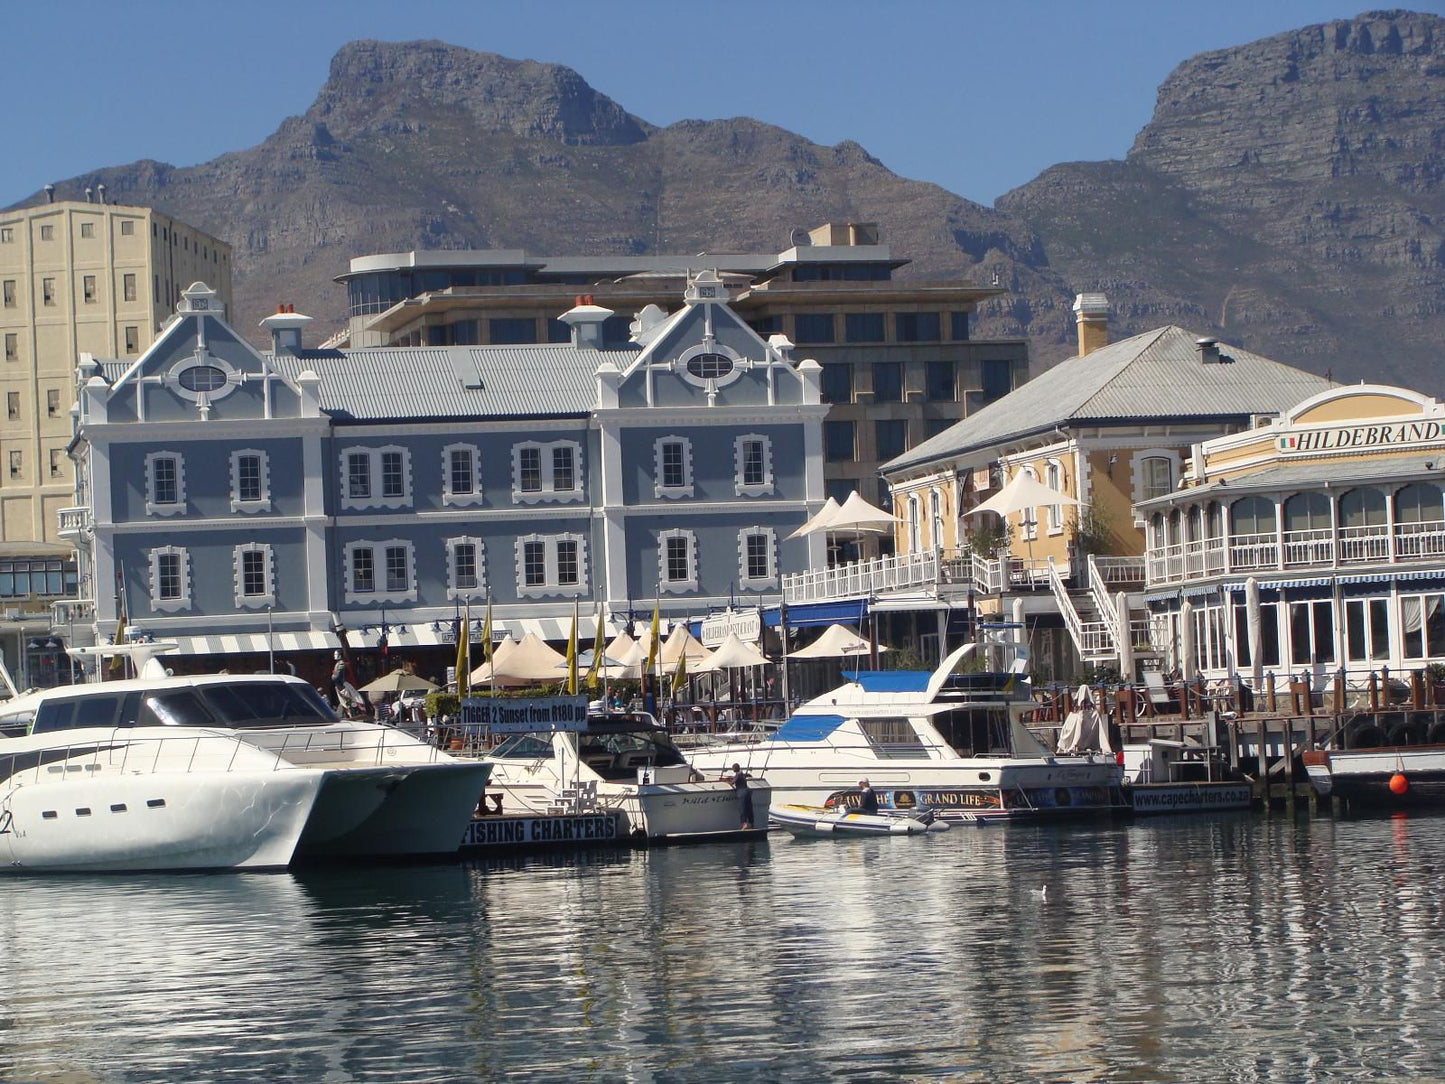 202 Kylemore A Marina Residential De Waterkant Cape Town Western Cape South Africa Harbor, Waters, City, Nature